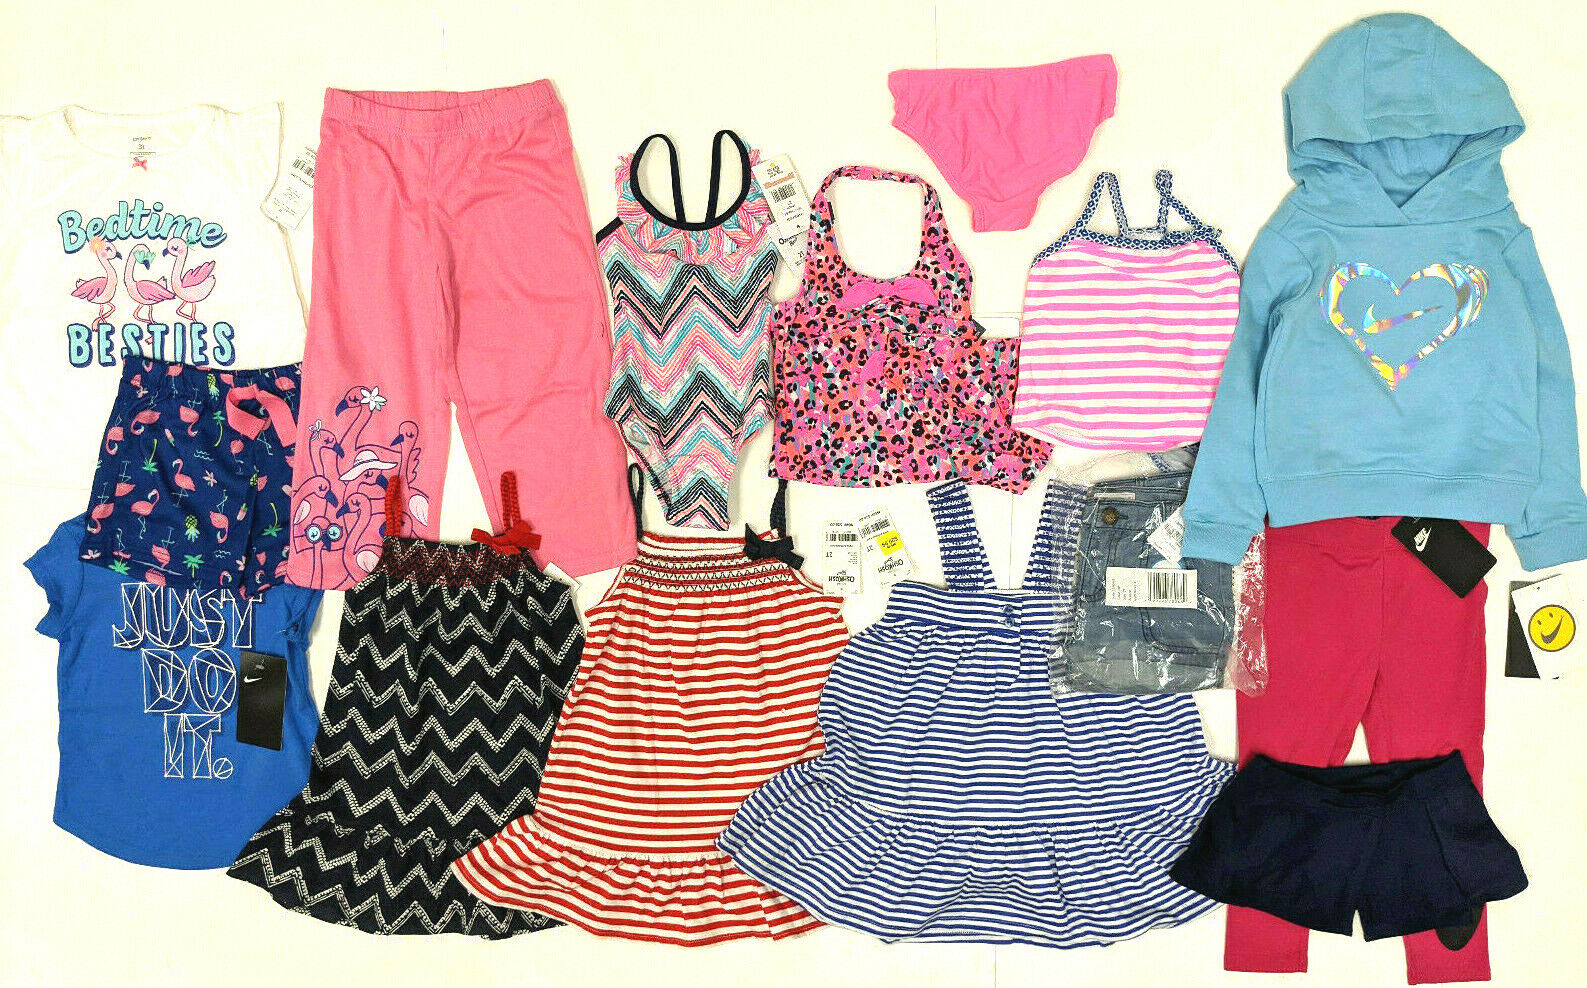 Nike Carters Toddler Girls 17 Piece Clothing Set - 2T/3T - New with tags Carter's / NIKE / OshKosh